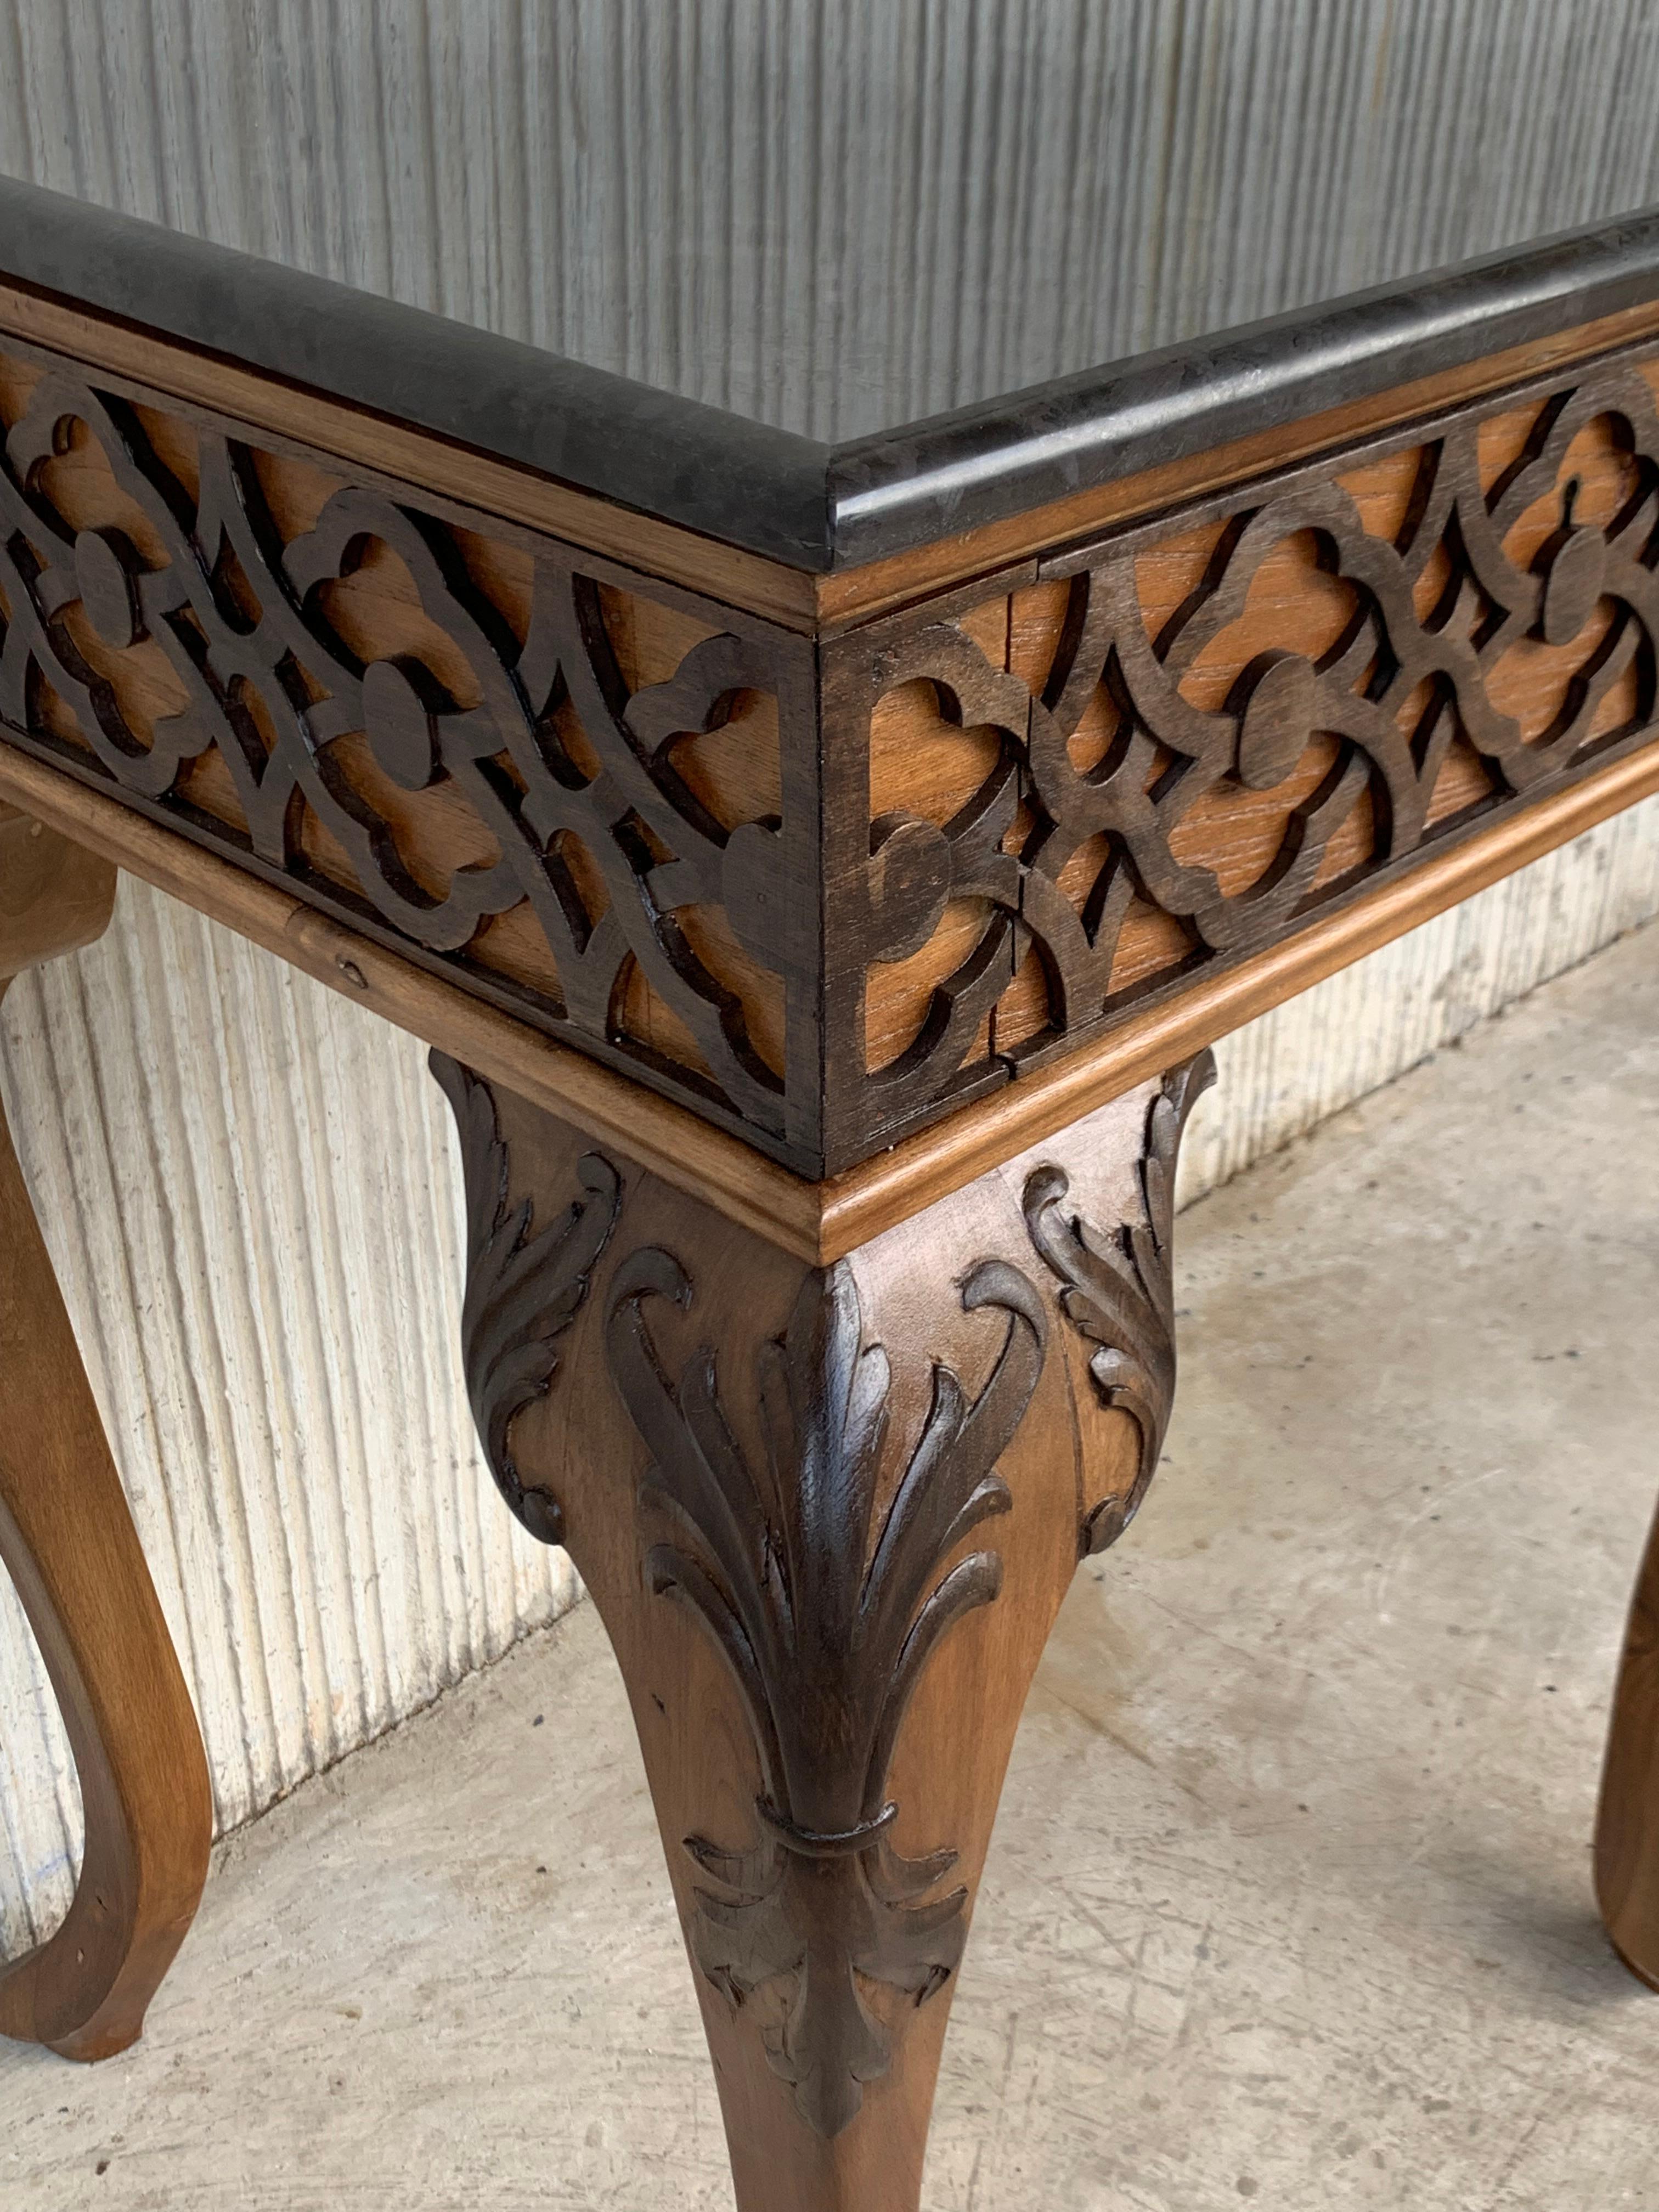 20th century large console table with three drawers walnut inlays and marble top.